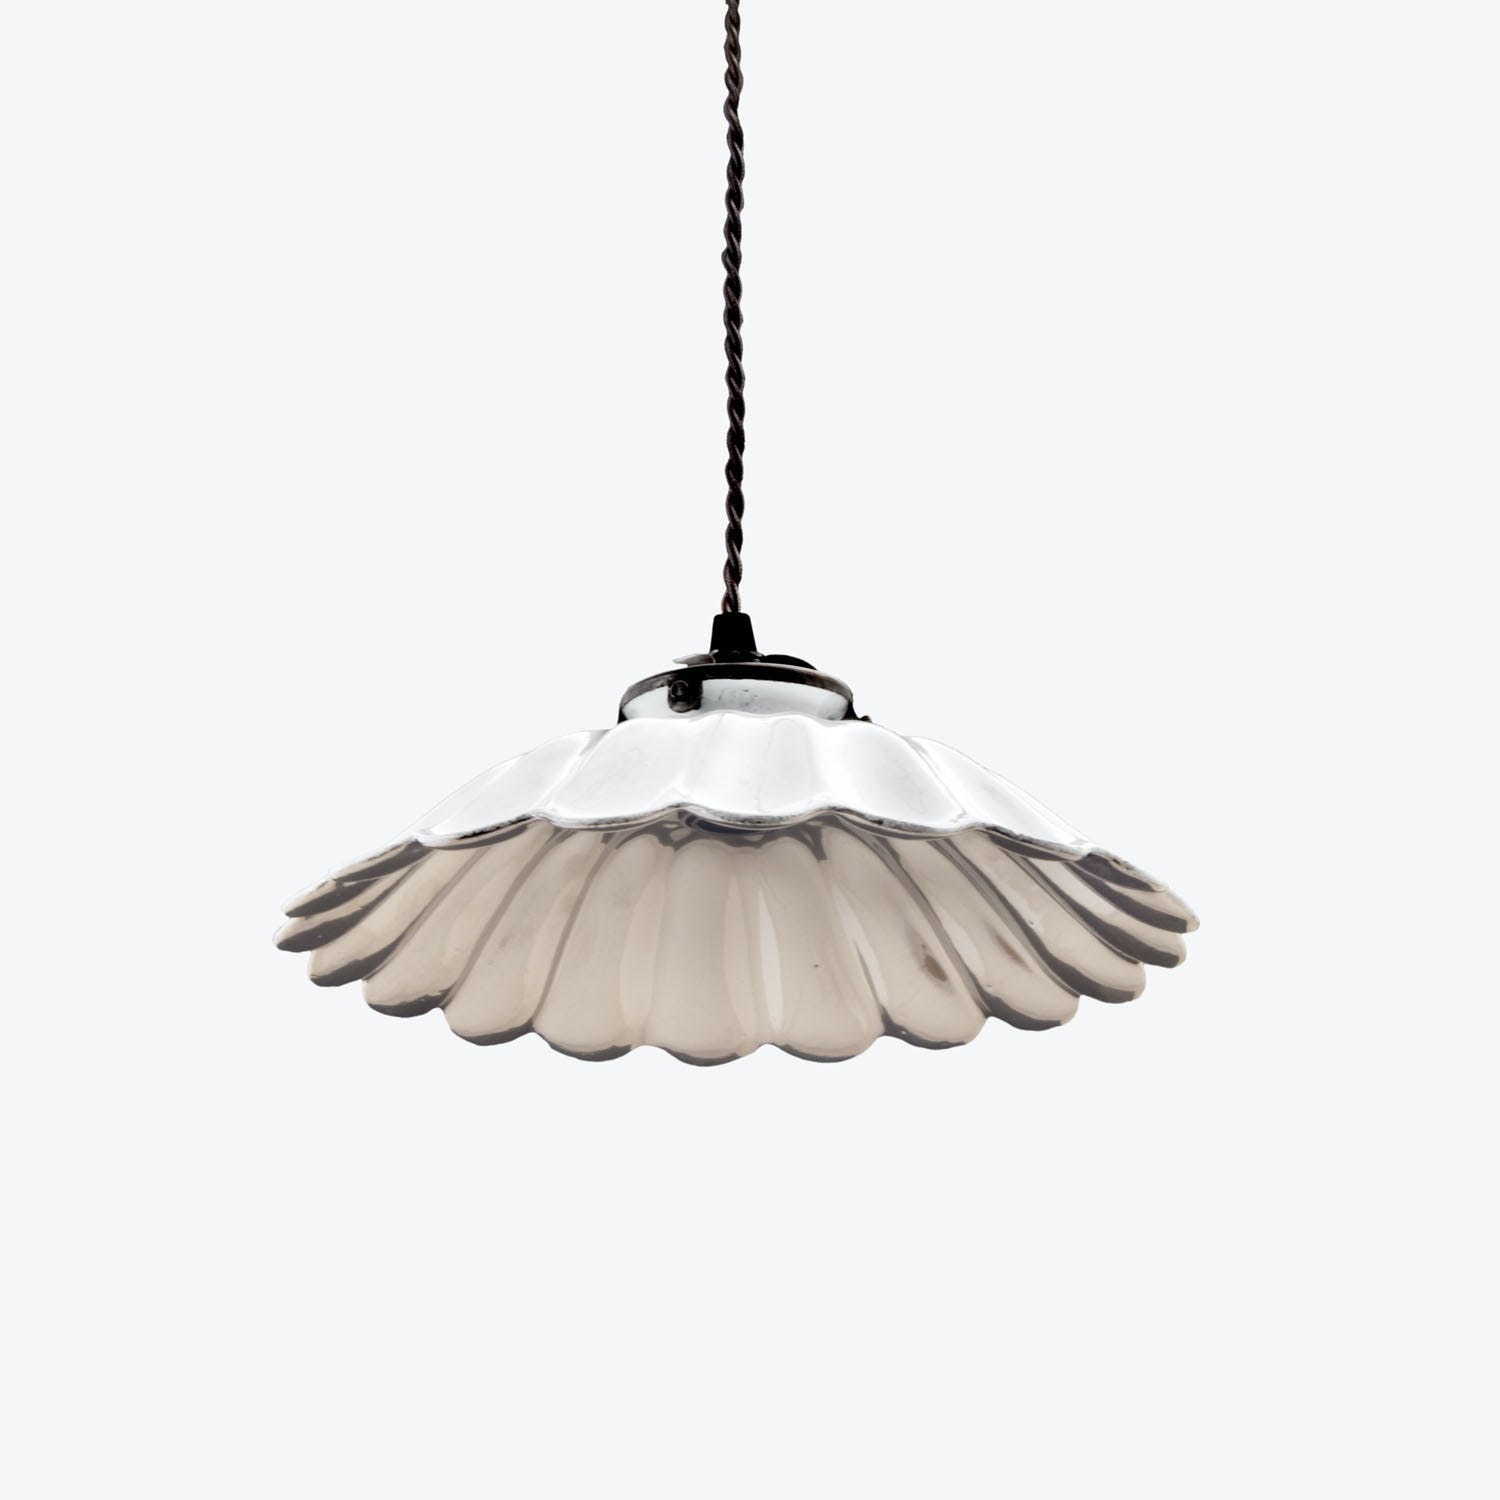 Vintage pendant light with unique fluted design, perfect for interiors.